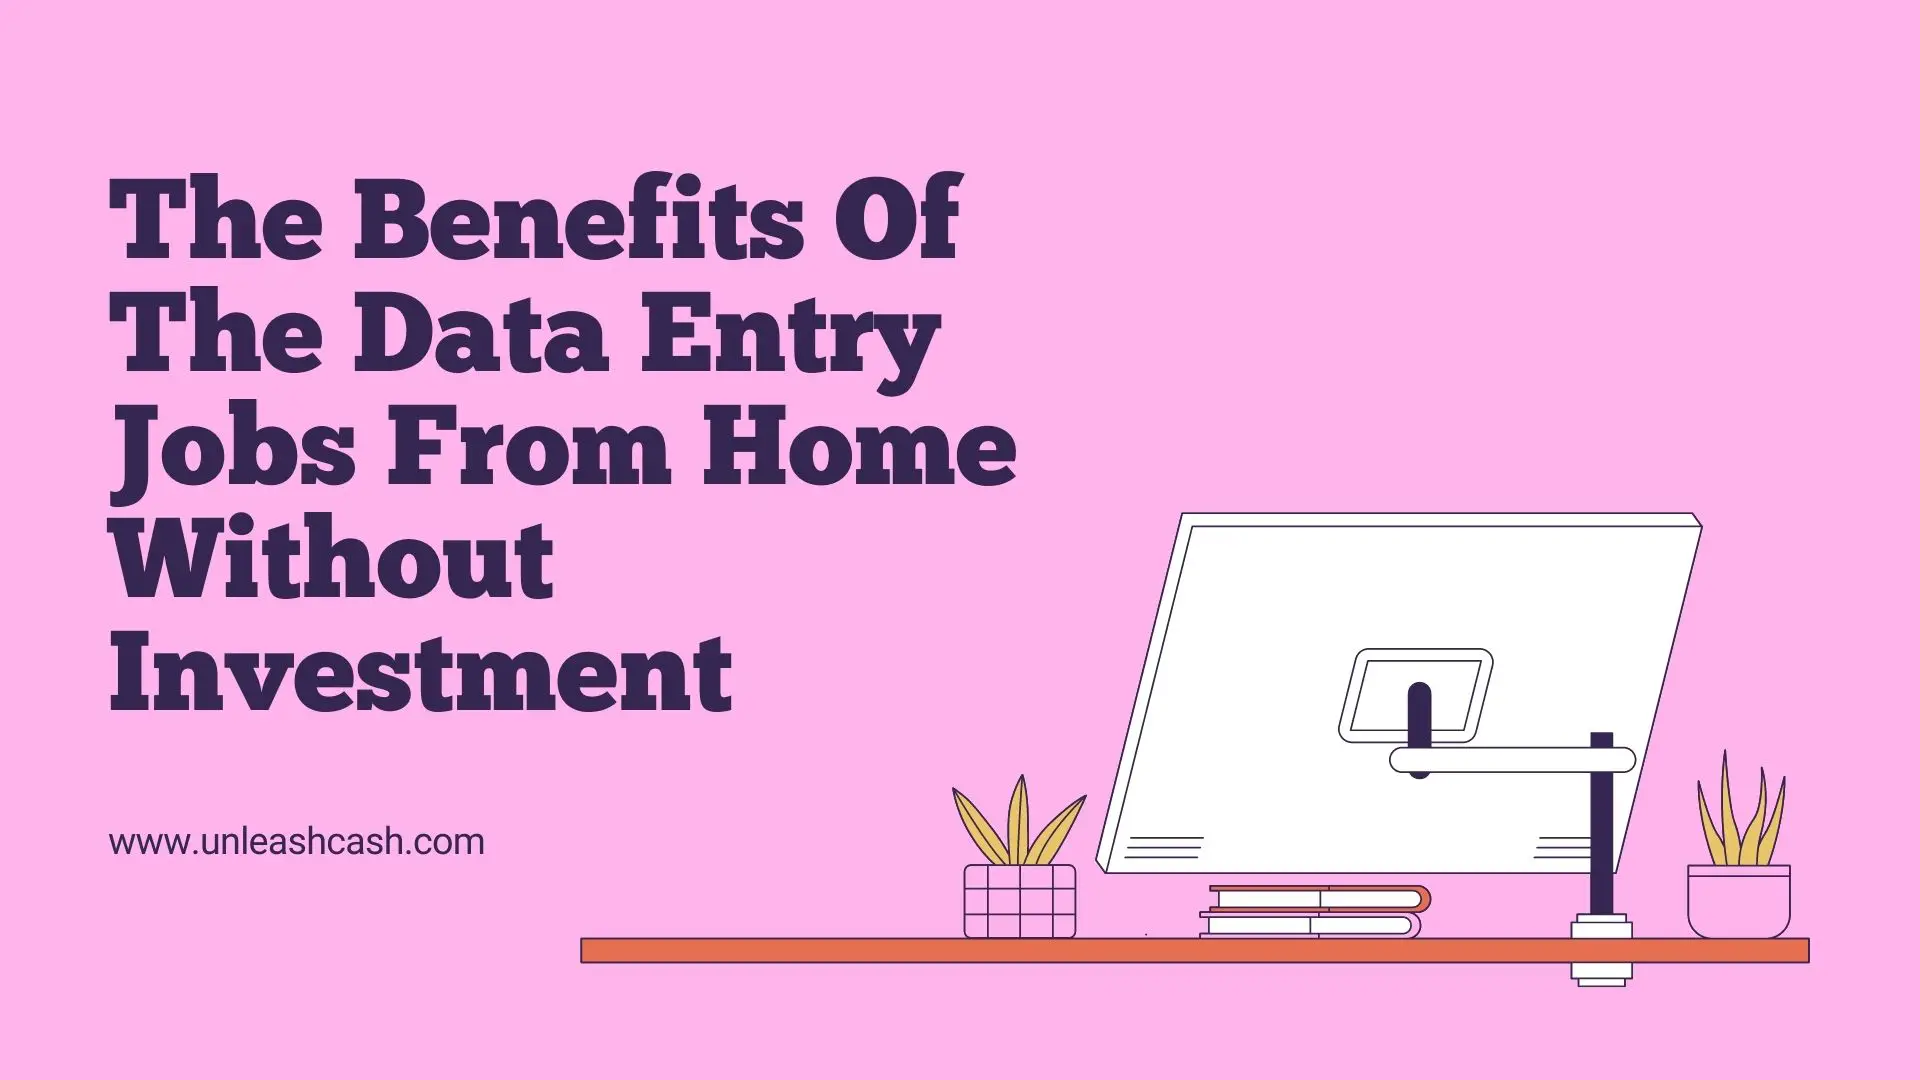 The Benefits Of The Data Entry Jobs From Home Without Investment